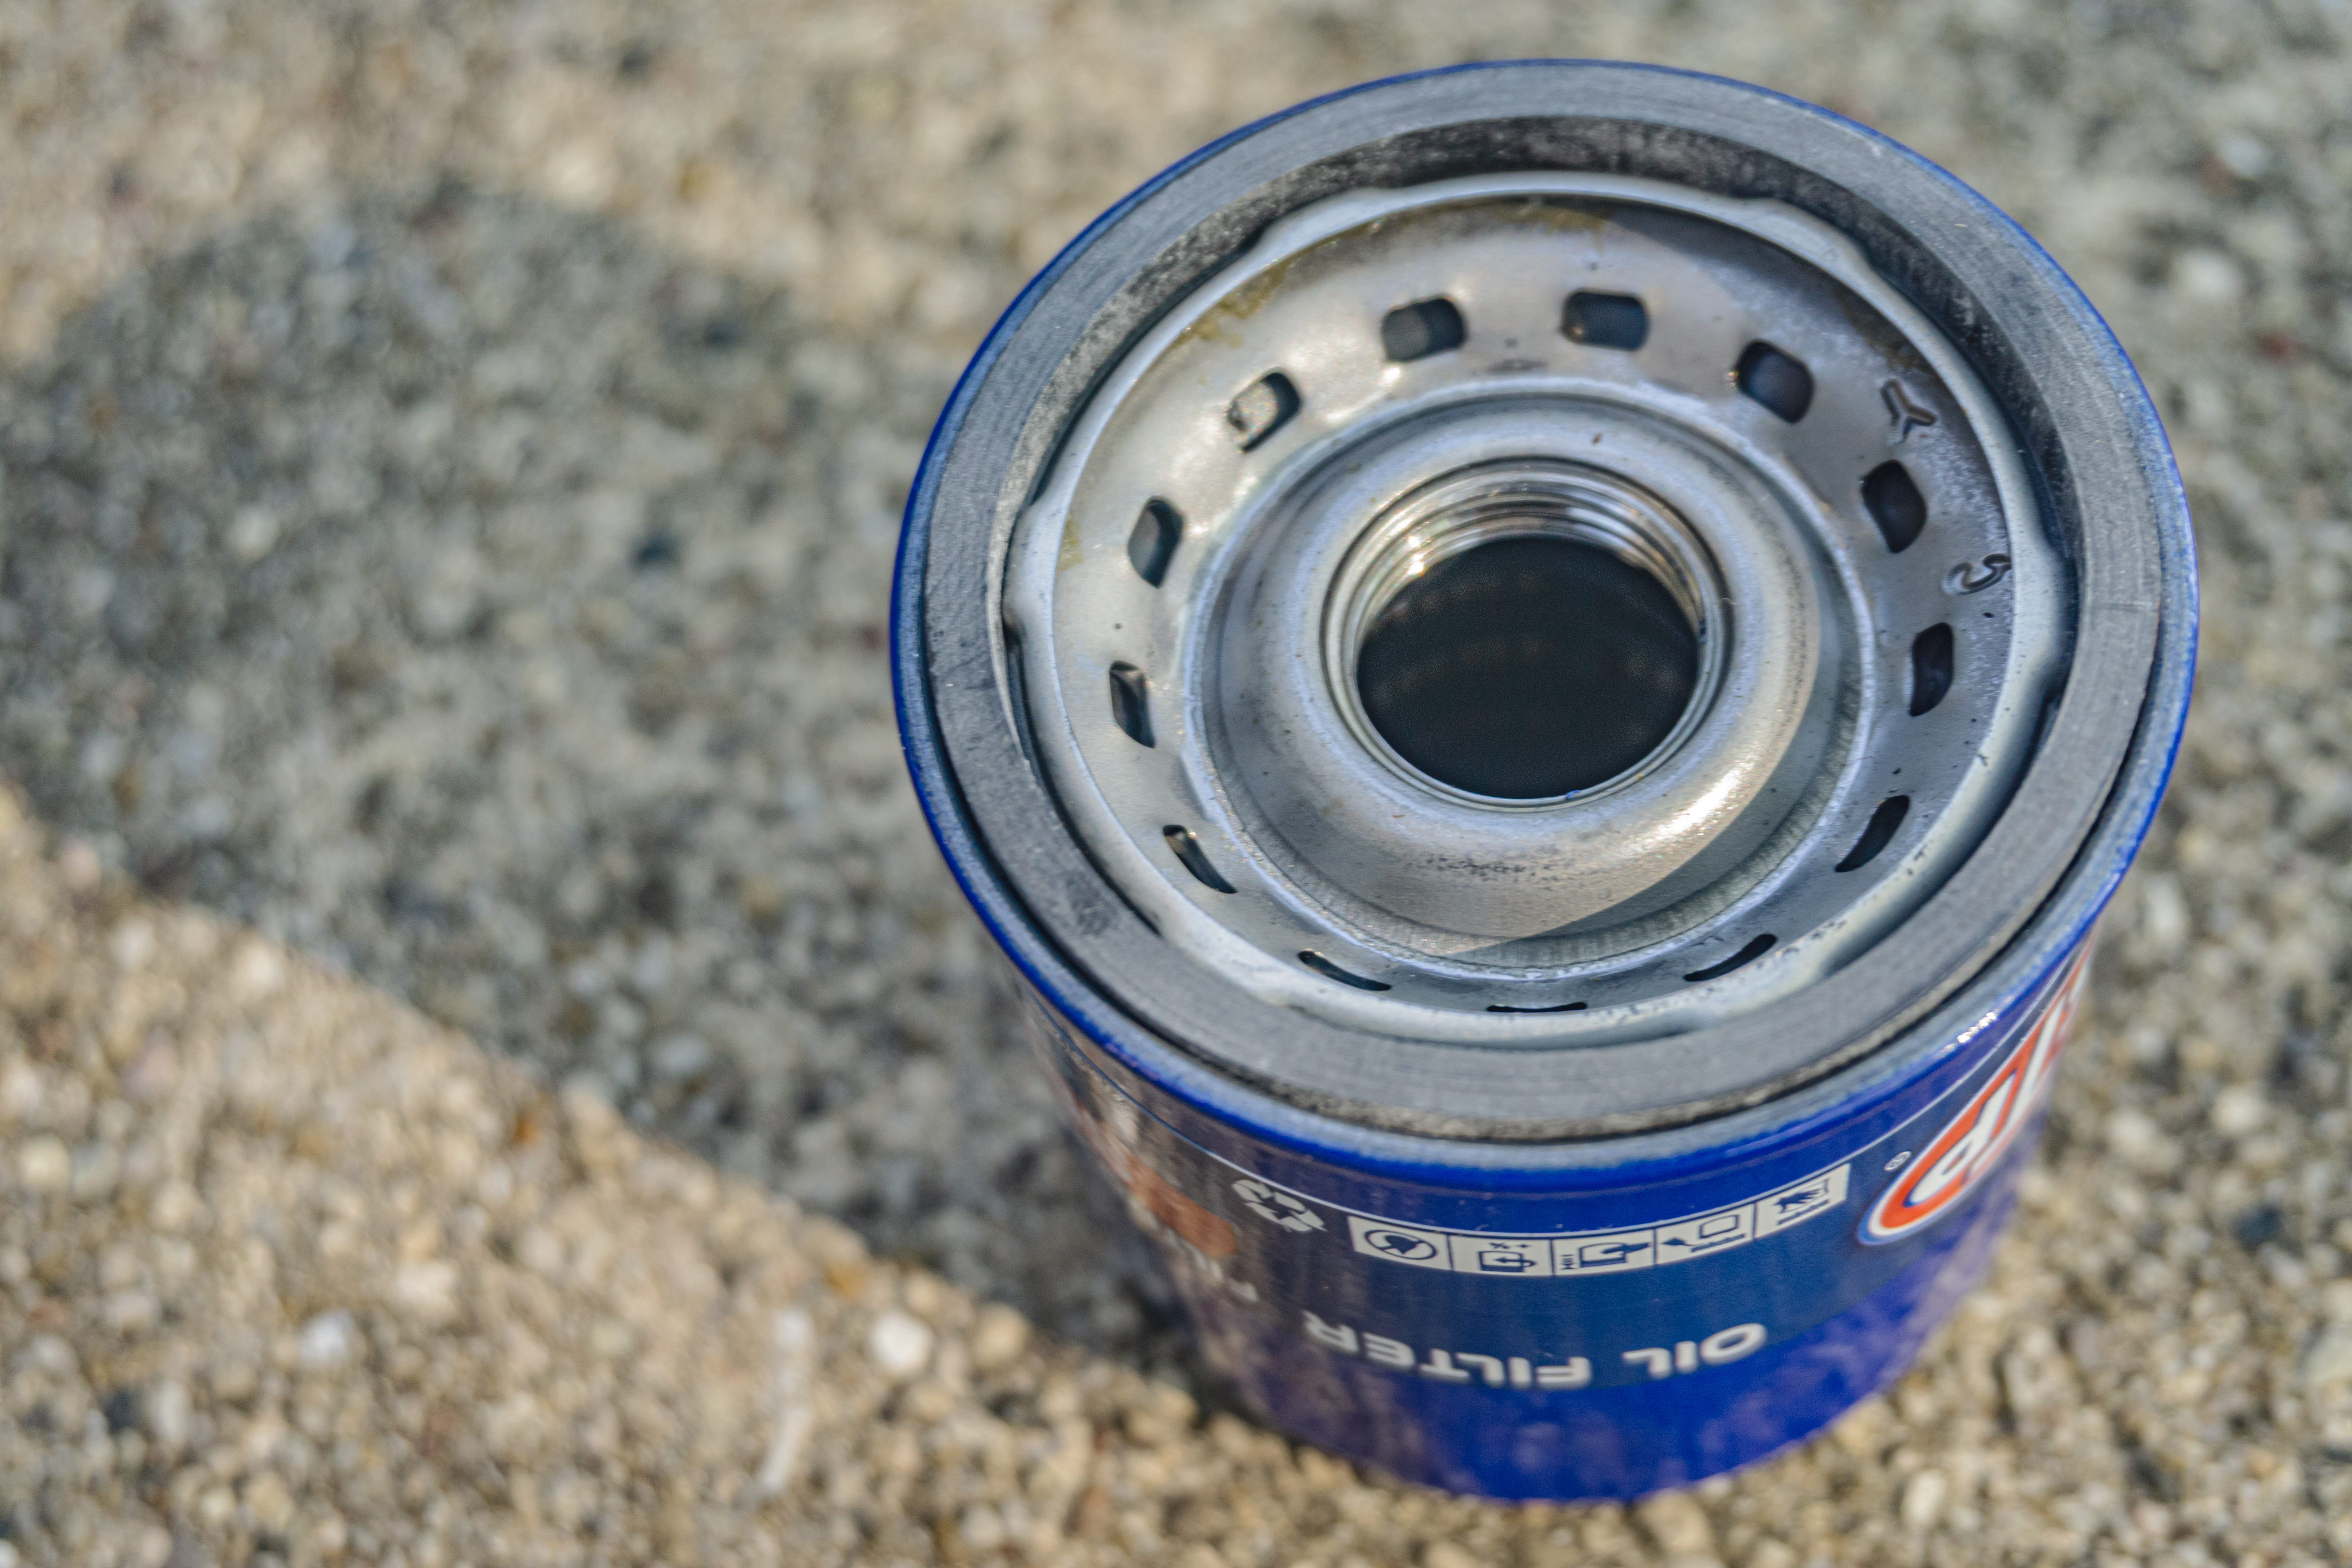 A close-up view of the top and interior of a blue spin-on oil filter